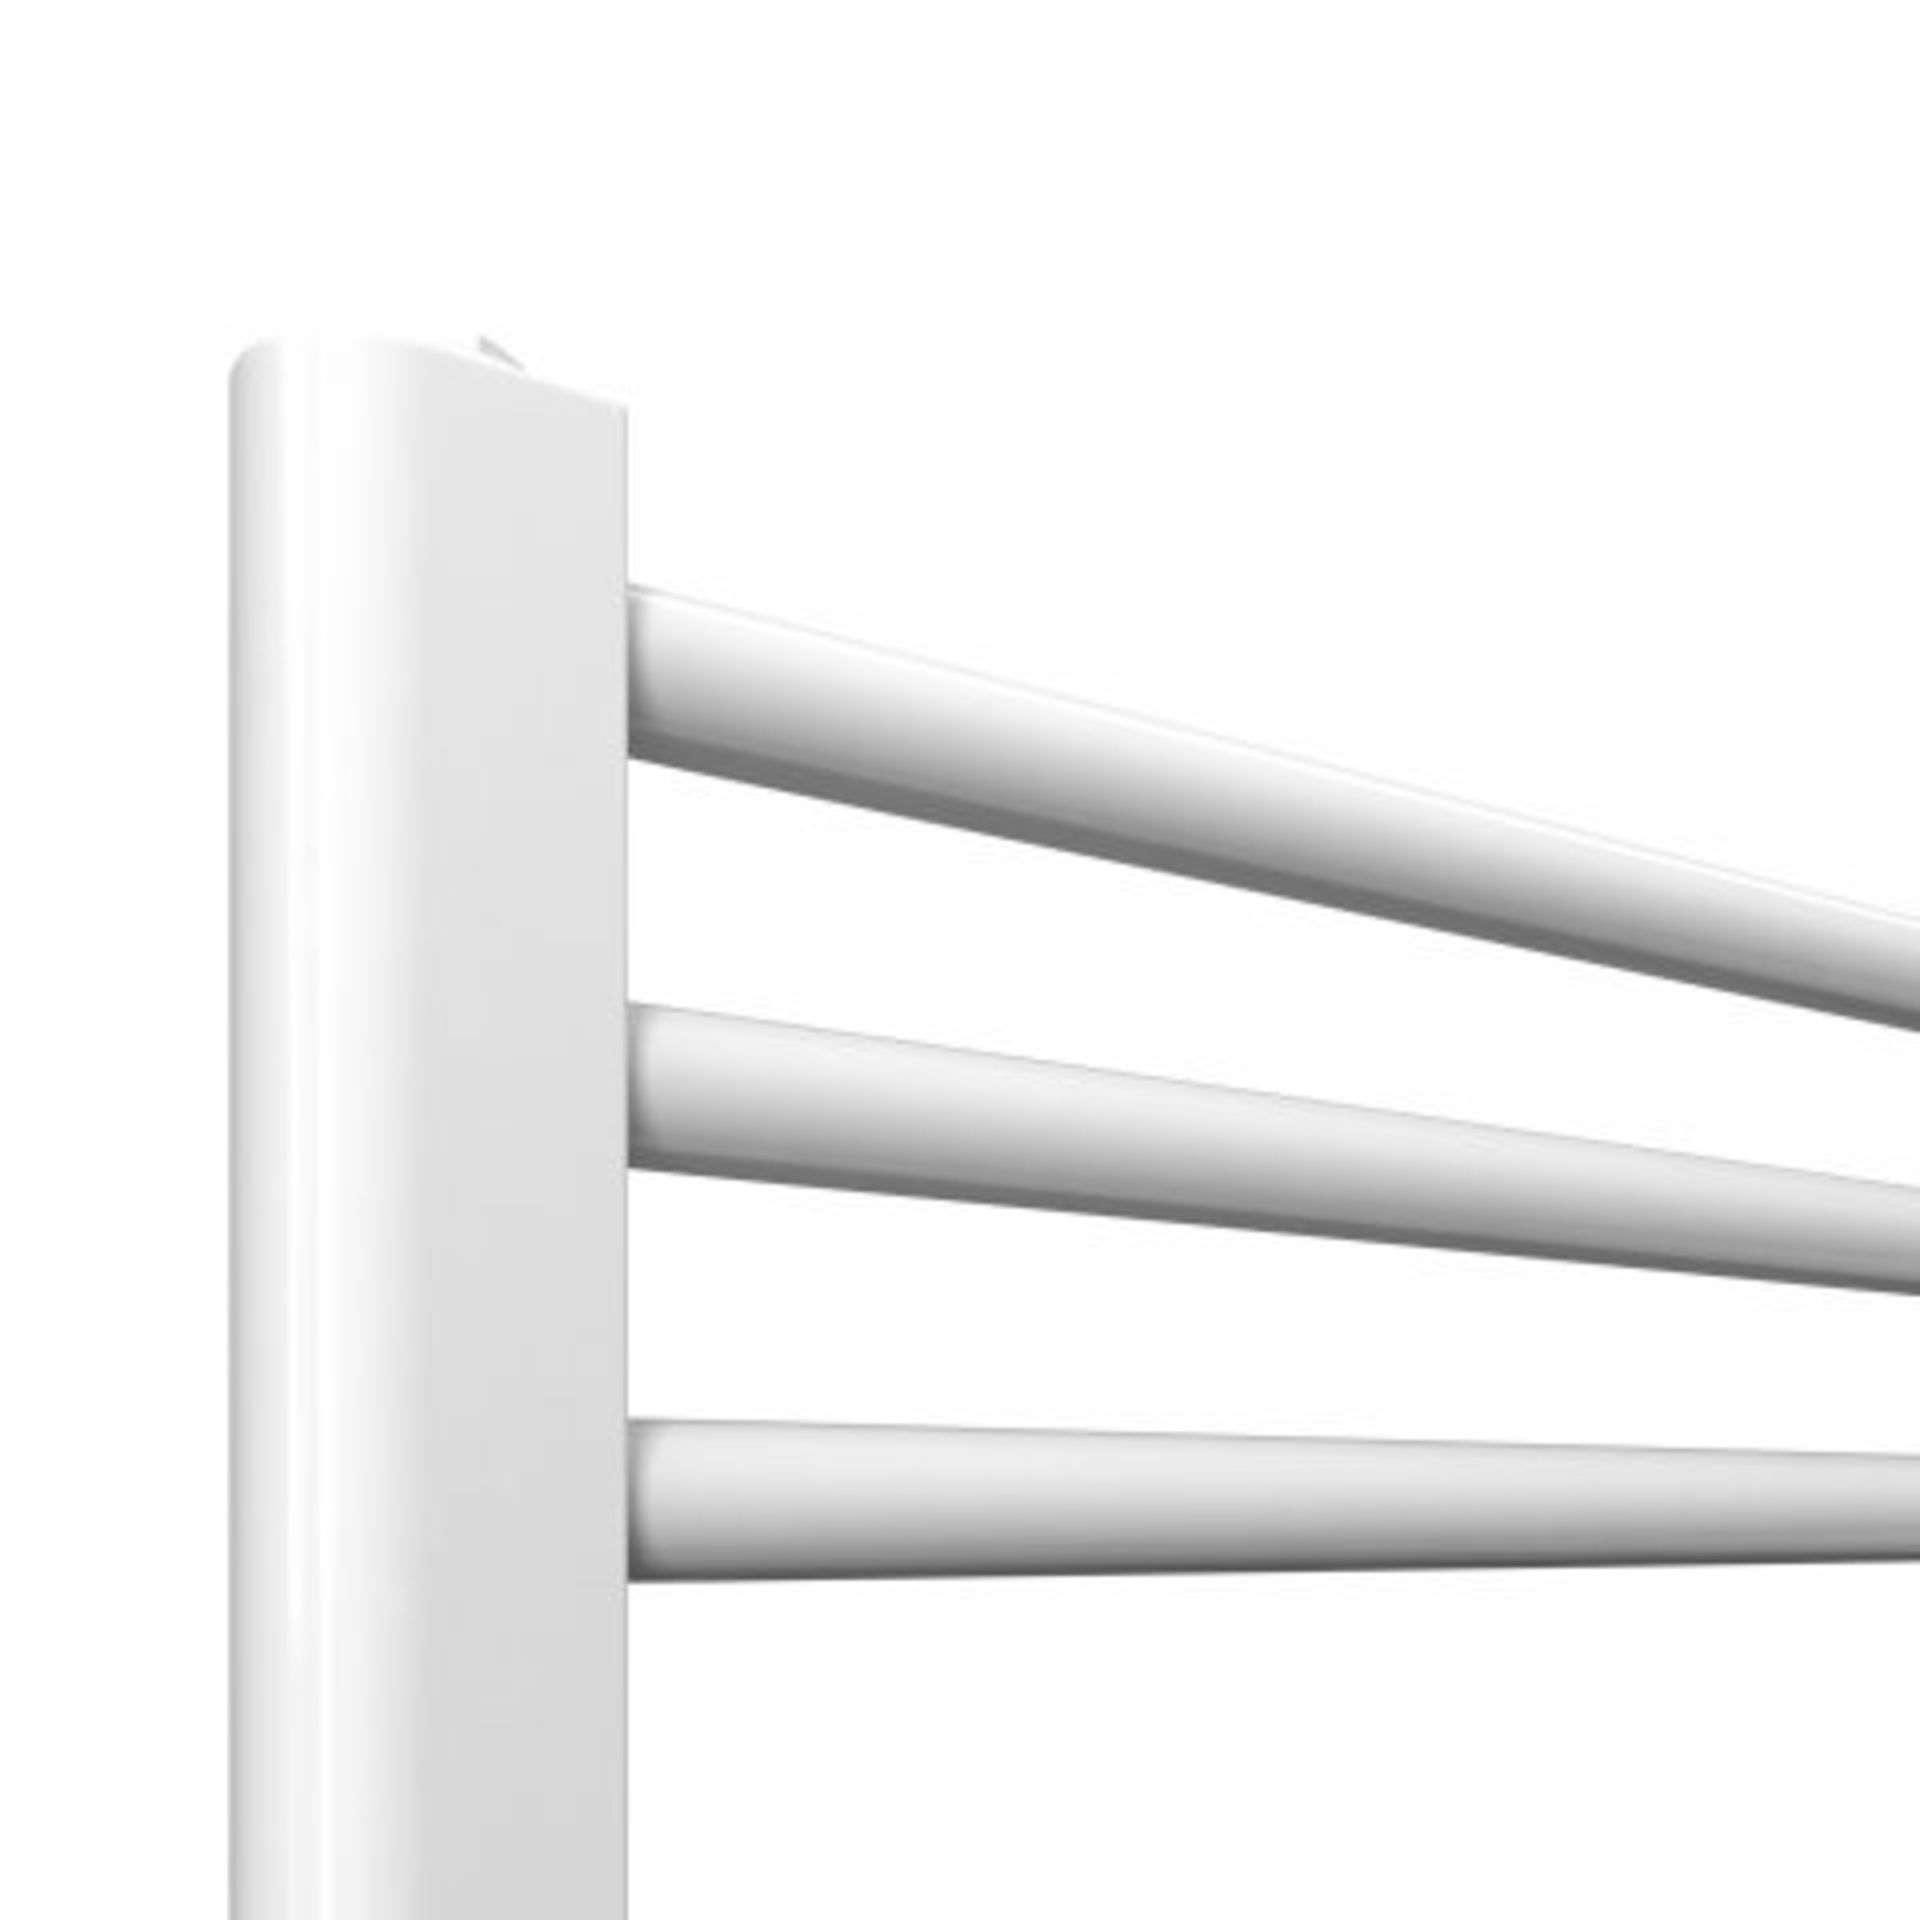 (N203) 1200x450mm White Straight Rail Ladder Towel Radiator. RRP £249.99. What heat output do I need - Image 4 of 6